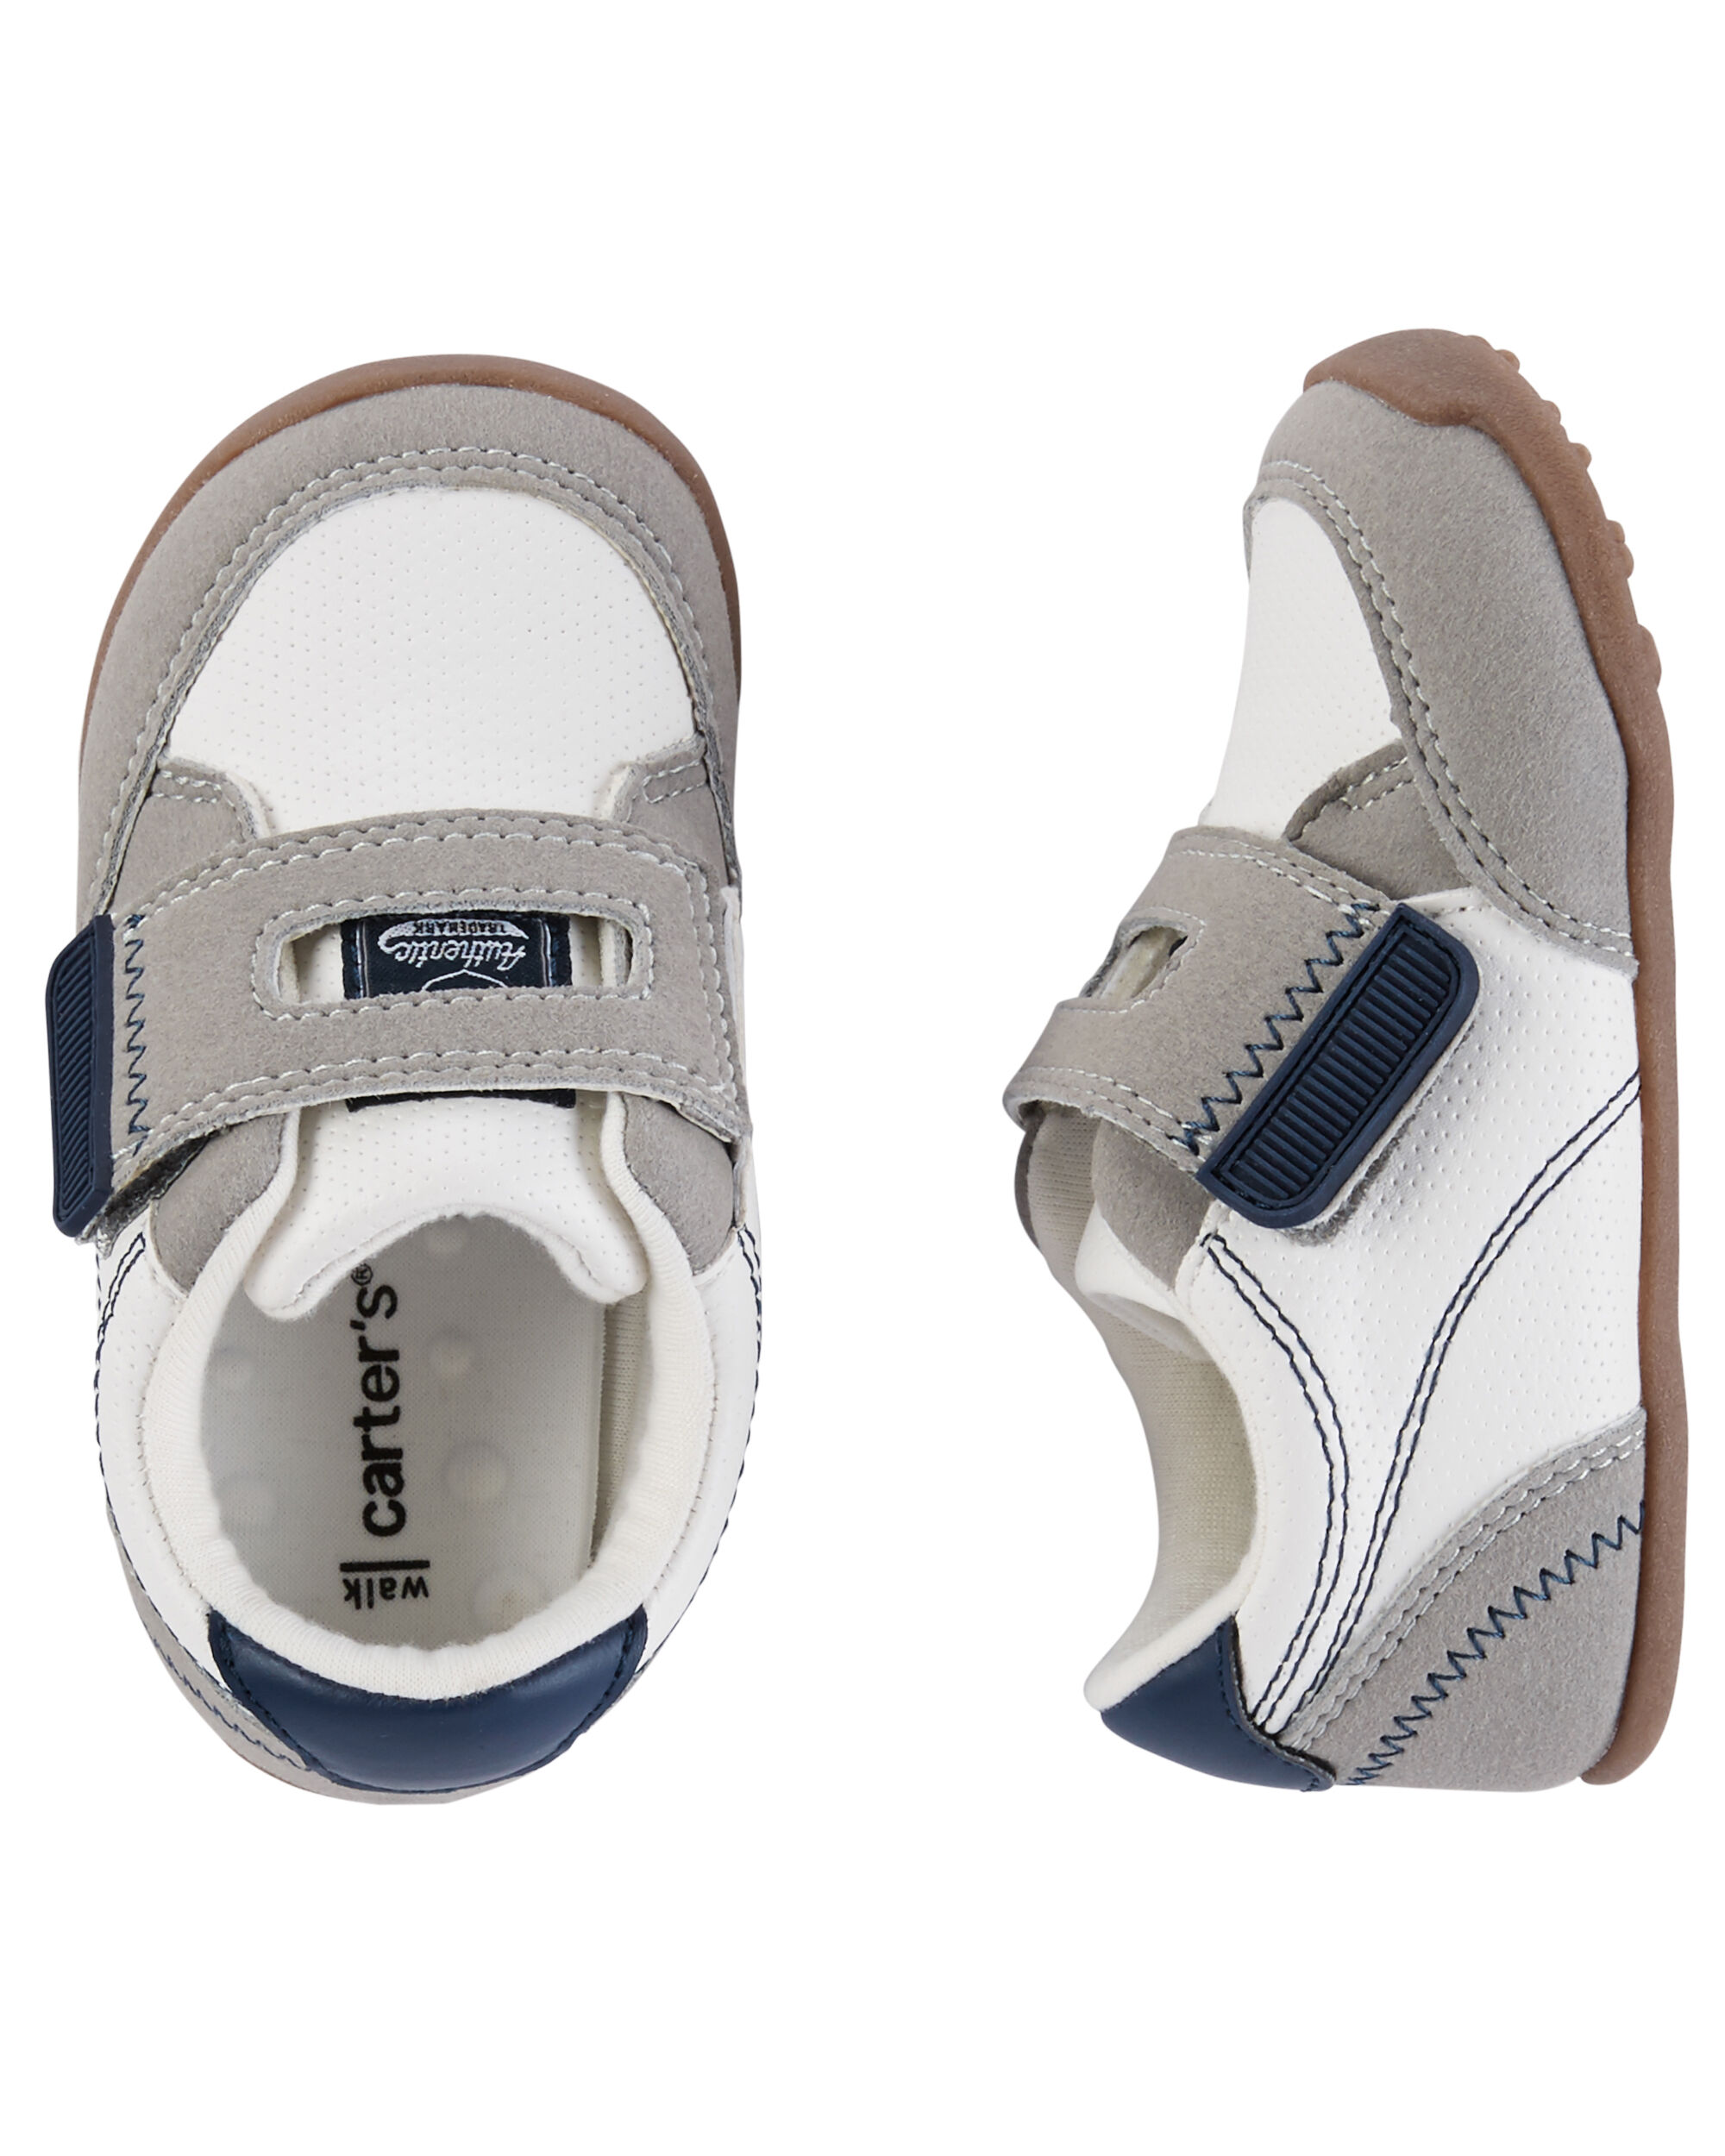 carter's every step stage 3 sneaker